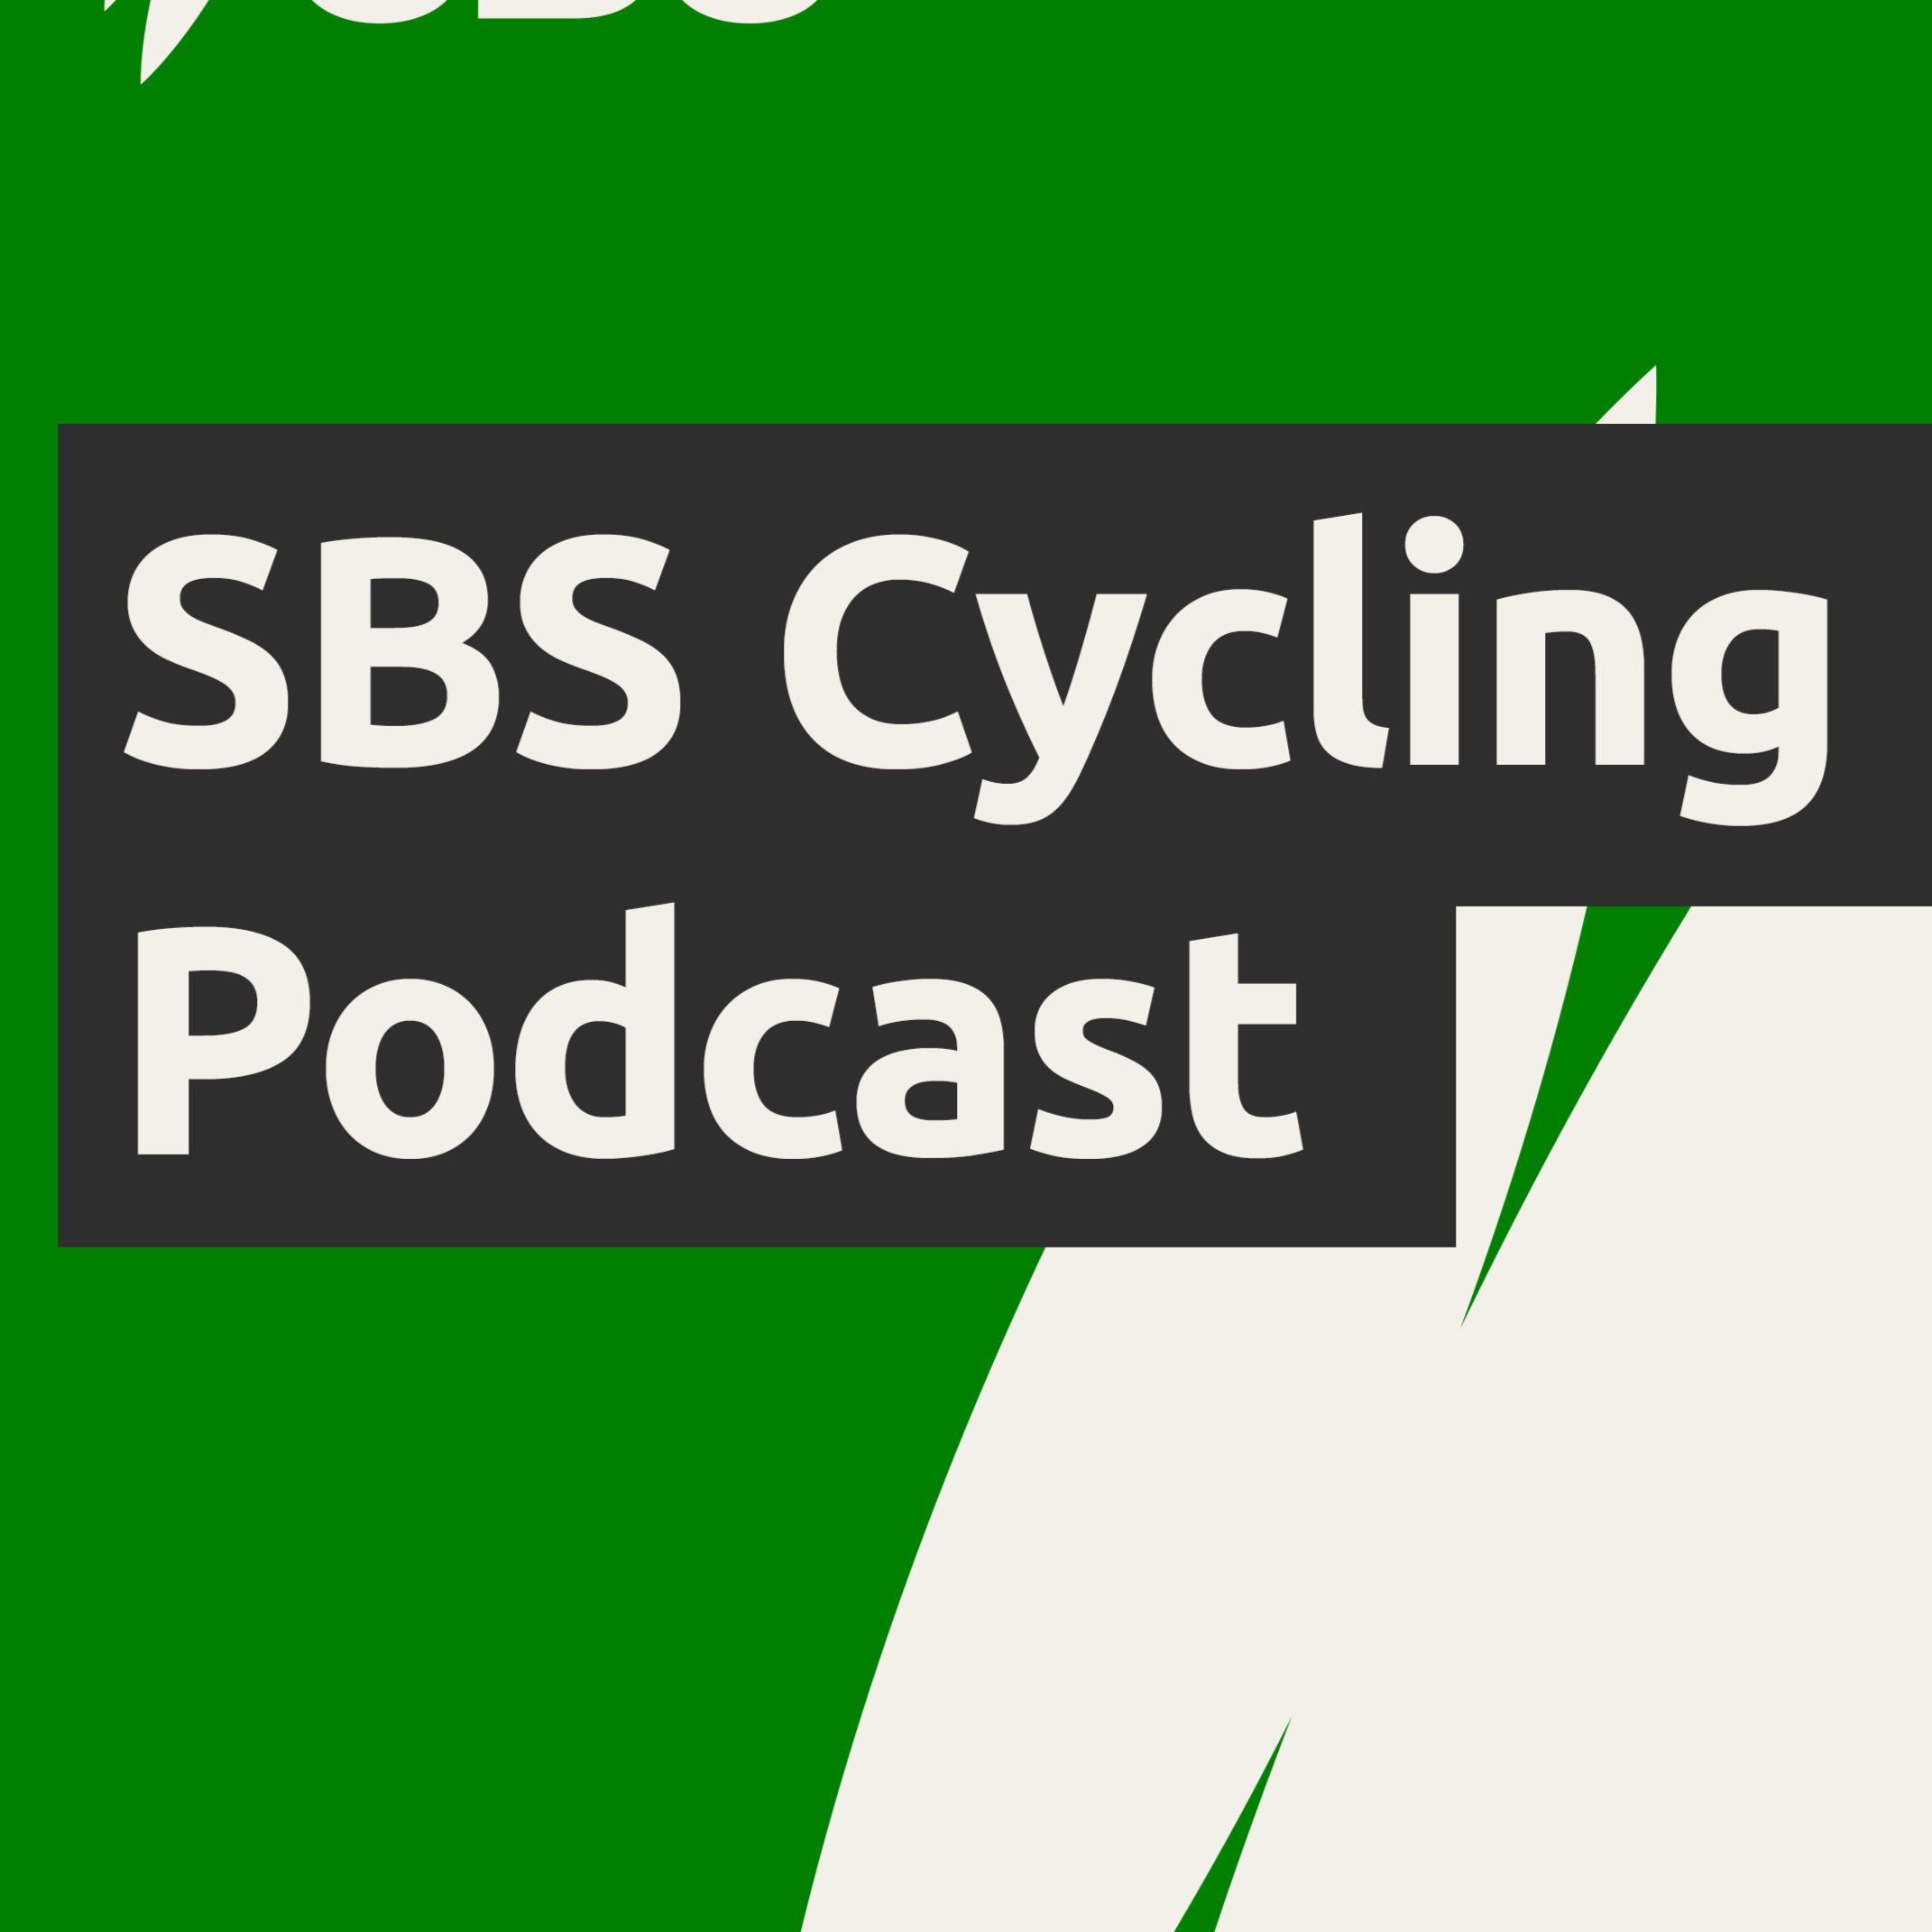 SBS Cycling Podcast